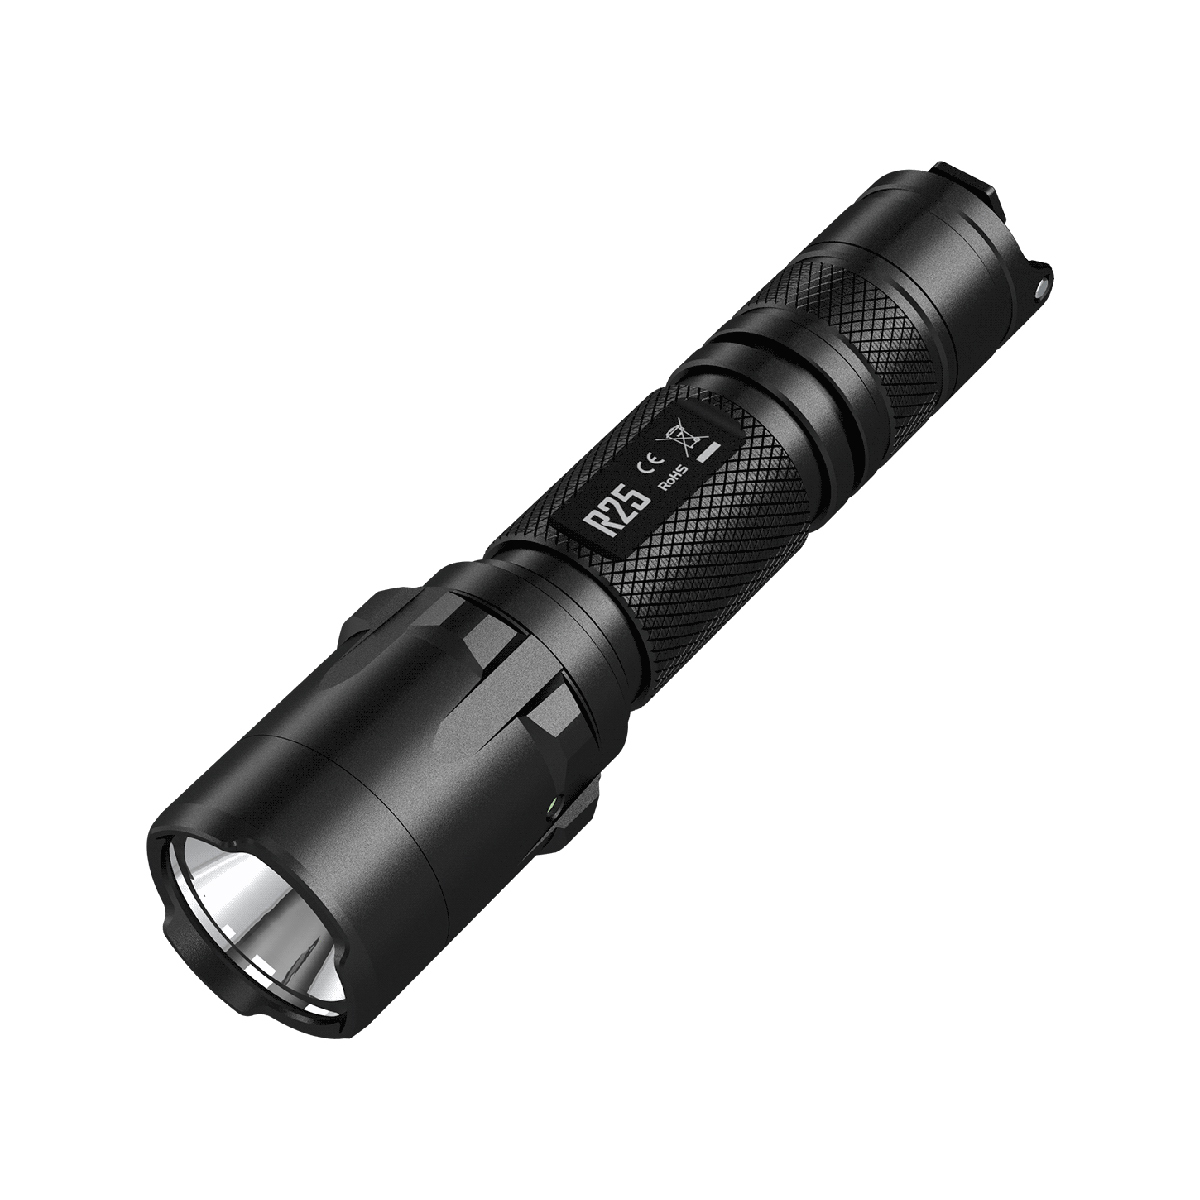 Nitecore Sysmax Industrial 9004674 800 Lumen Rechargeable Tactical Led Flashlight With Charging Dock - Black